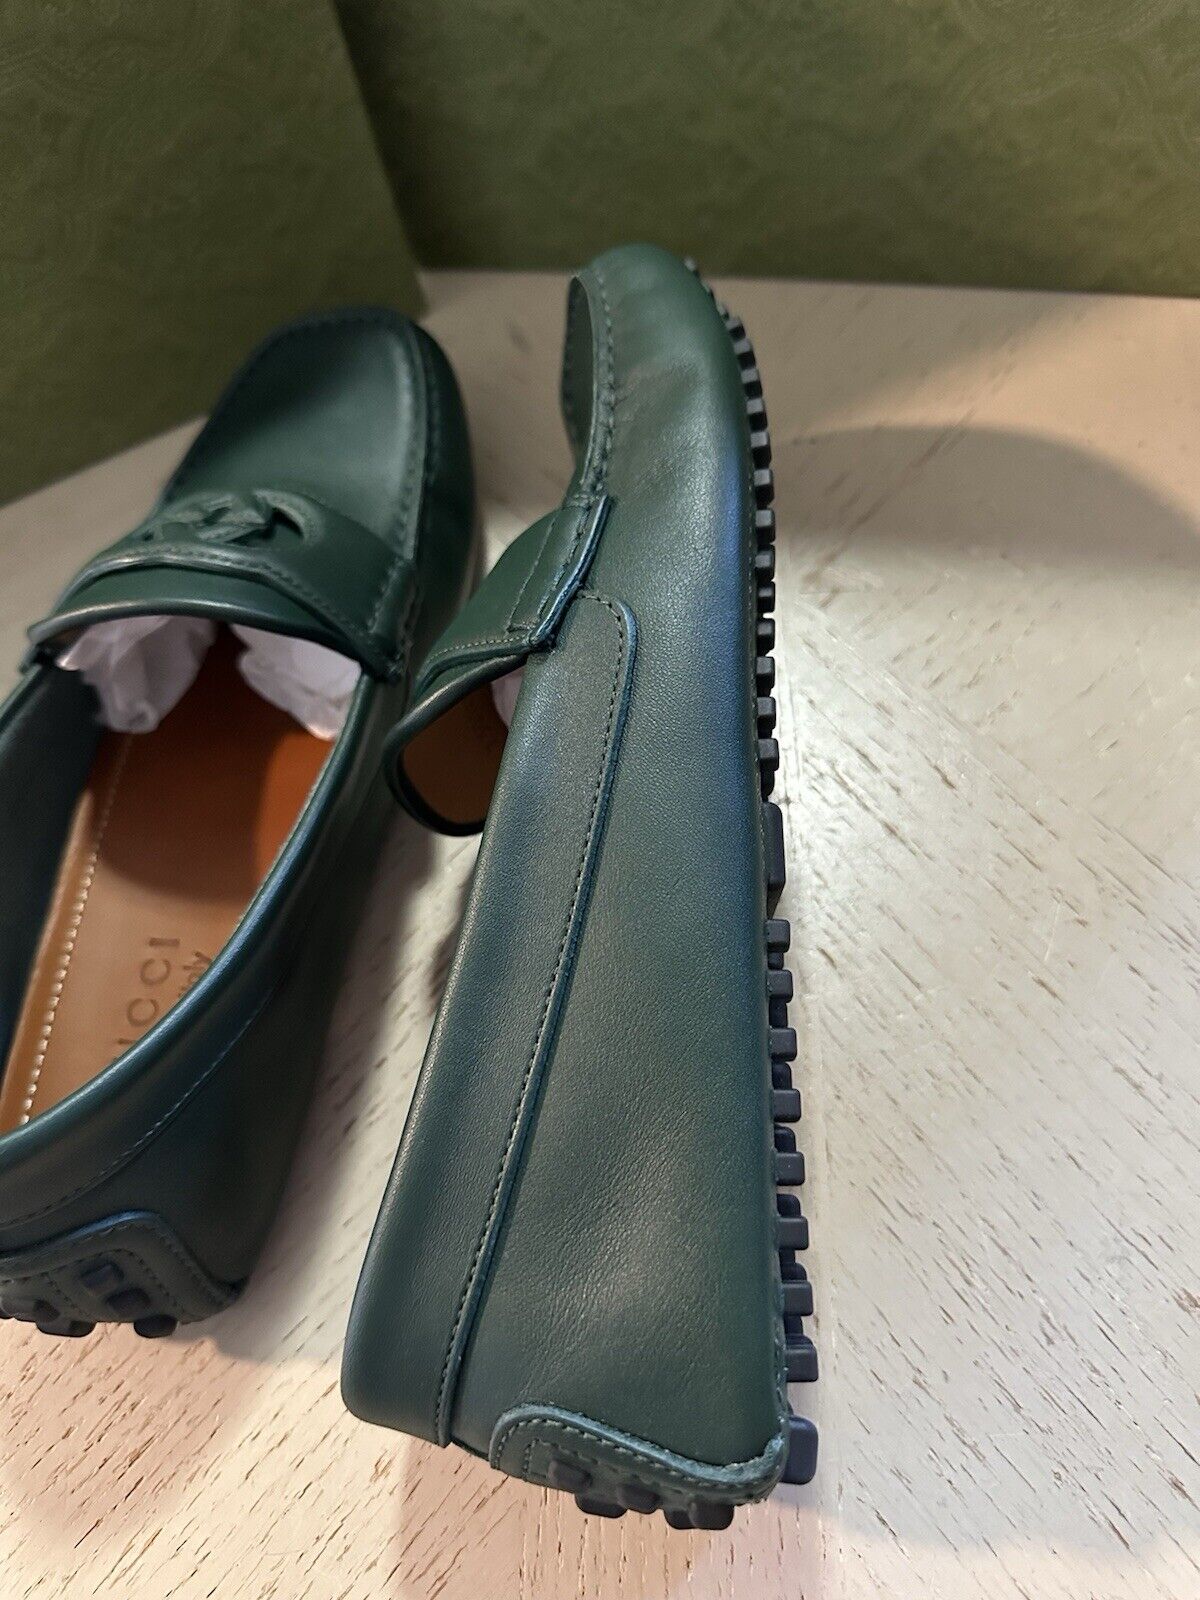 Gucci Men Leather GG Driver Loafers Shoes Green 8.5 US/7.5 UK 730148 New